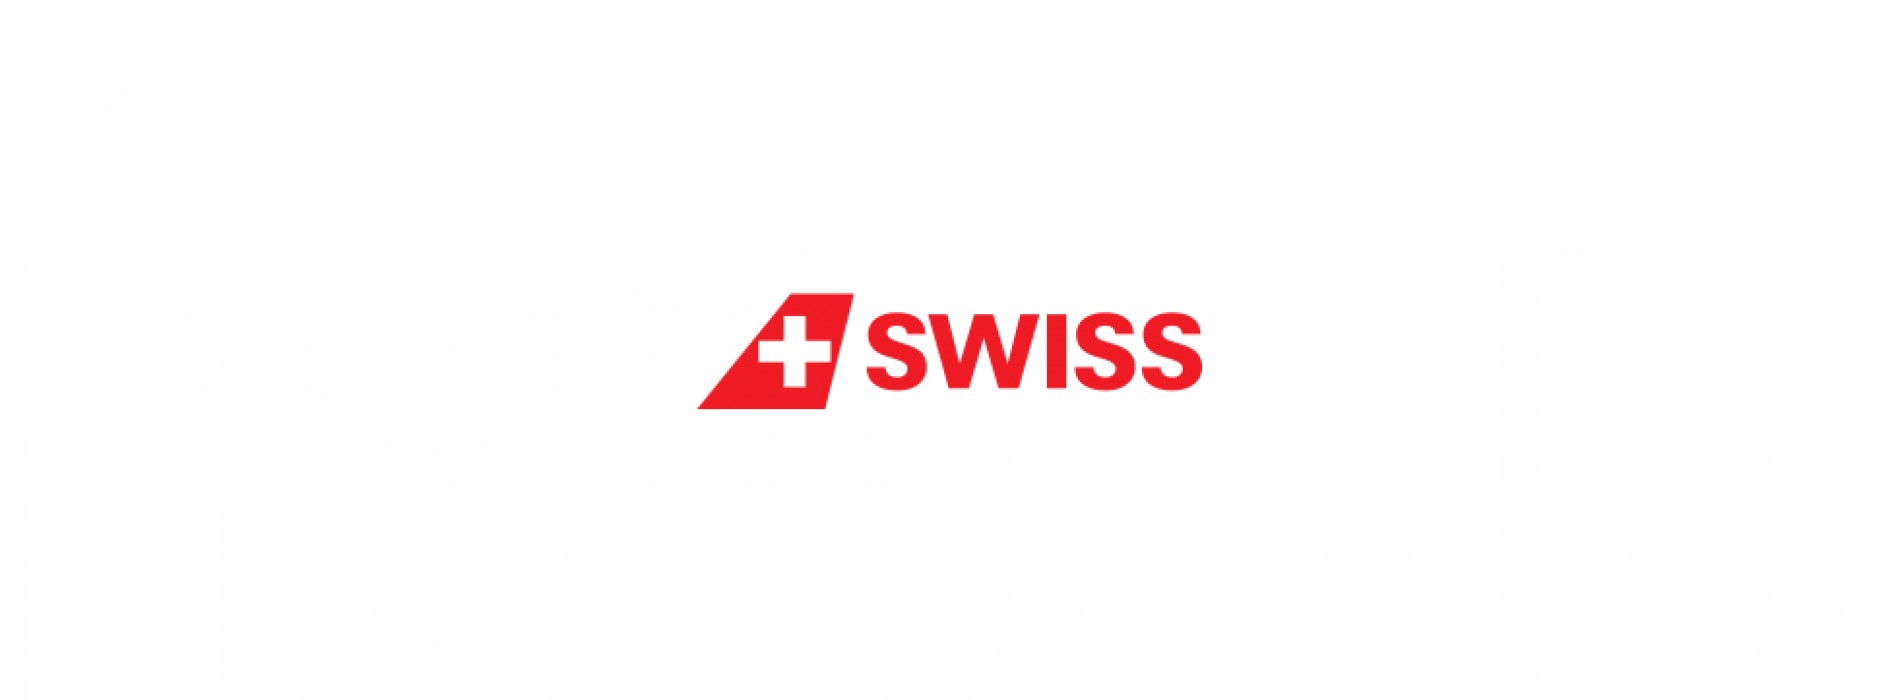 SWISS introduces new advance-purchase vouchers for airport lounge access and internet on board